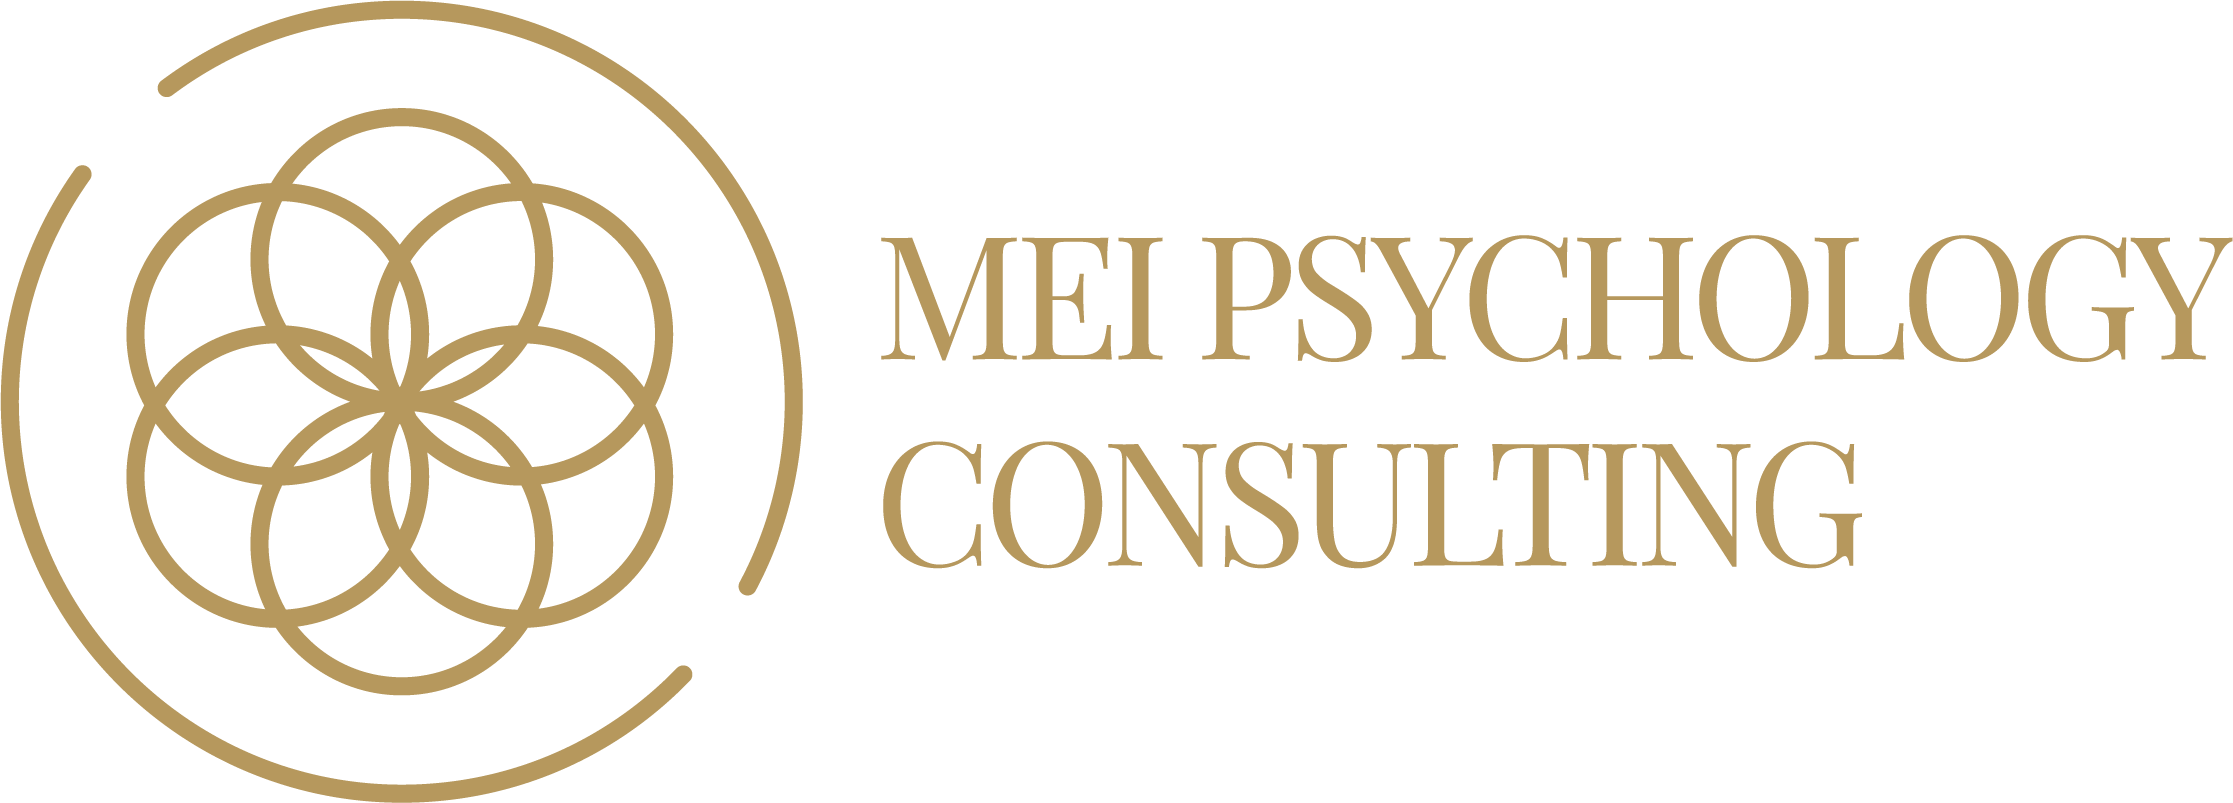 MEI Psychology Consulting